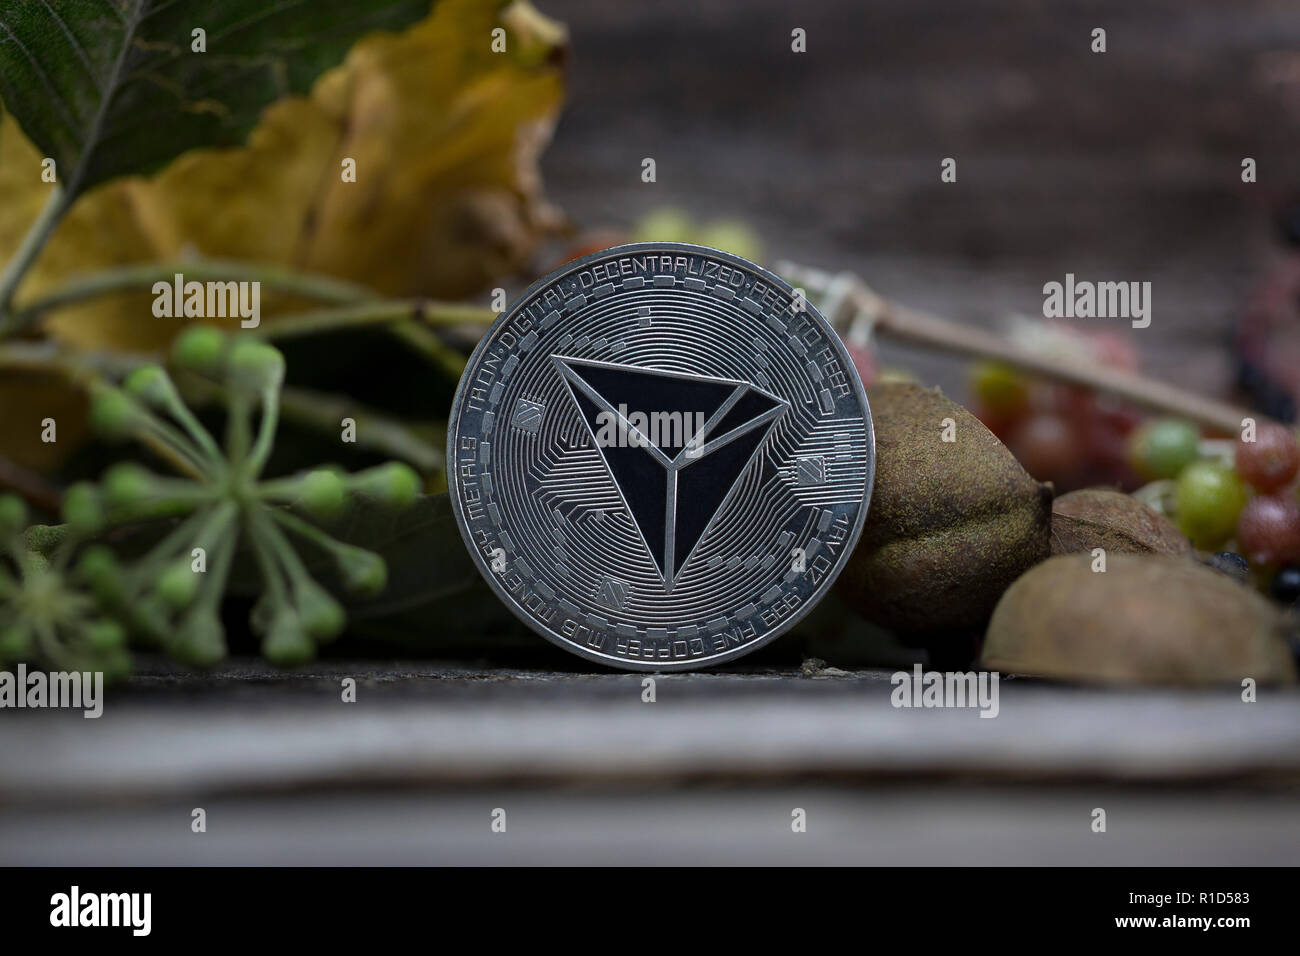 Tron cryptocurrency physical coin placed on the wood and surrounded with autumn flora Stock Photo